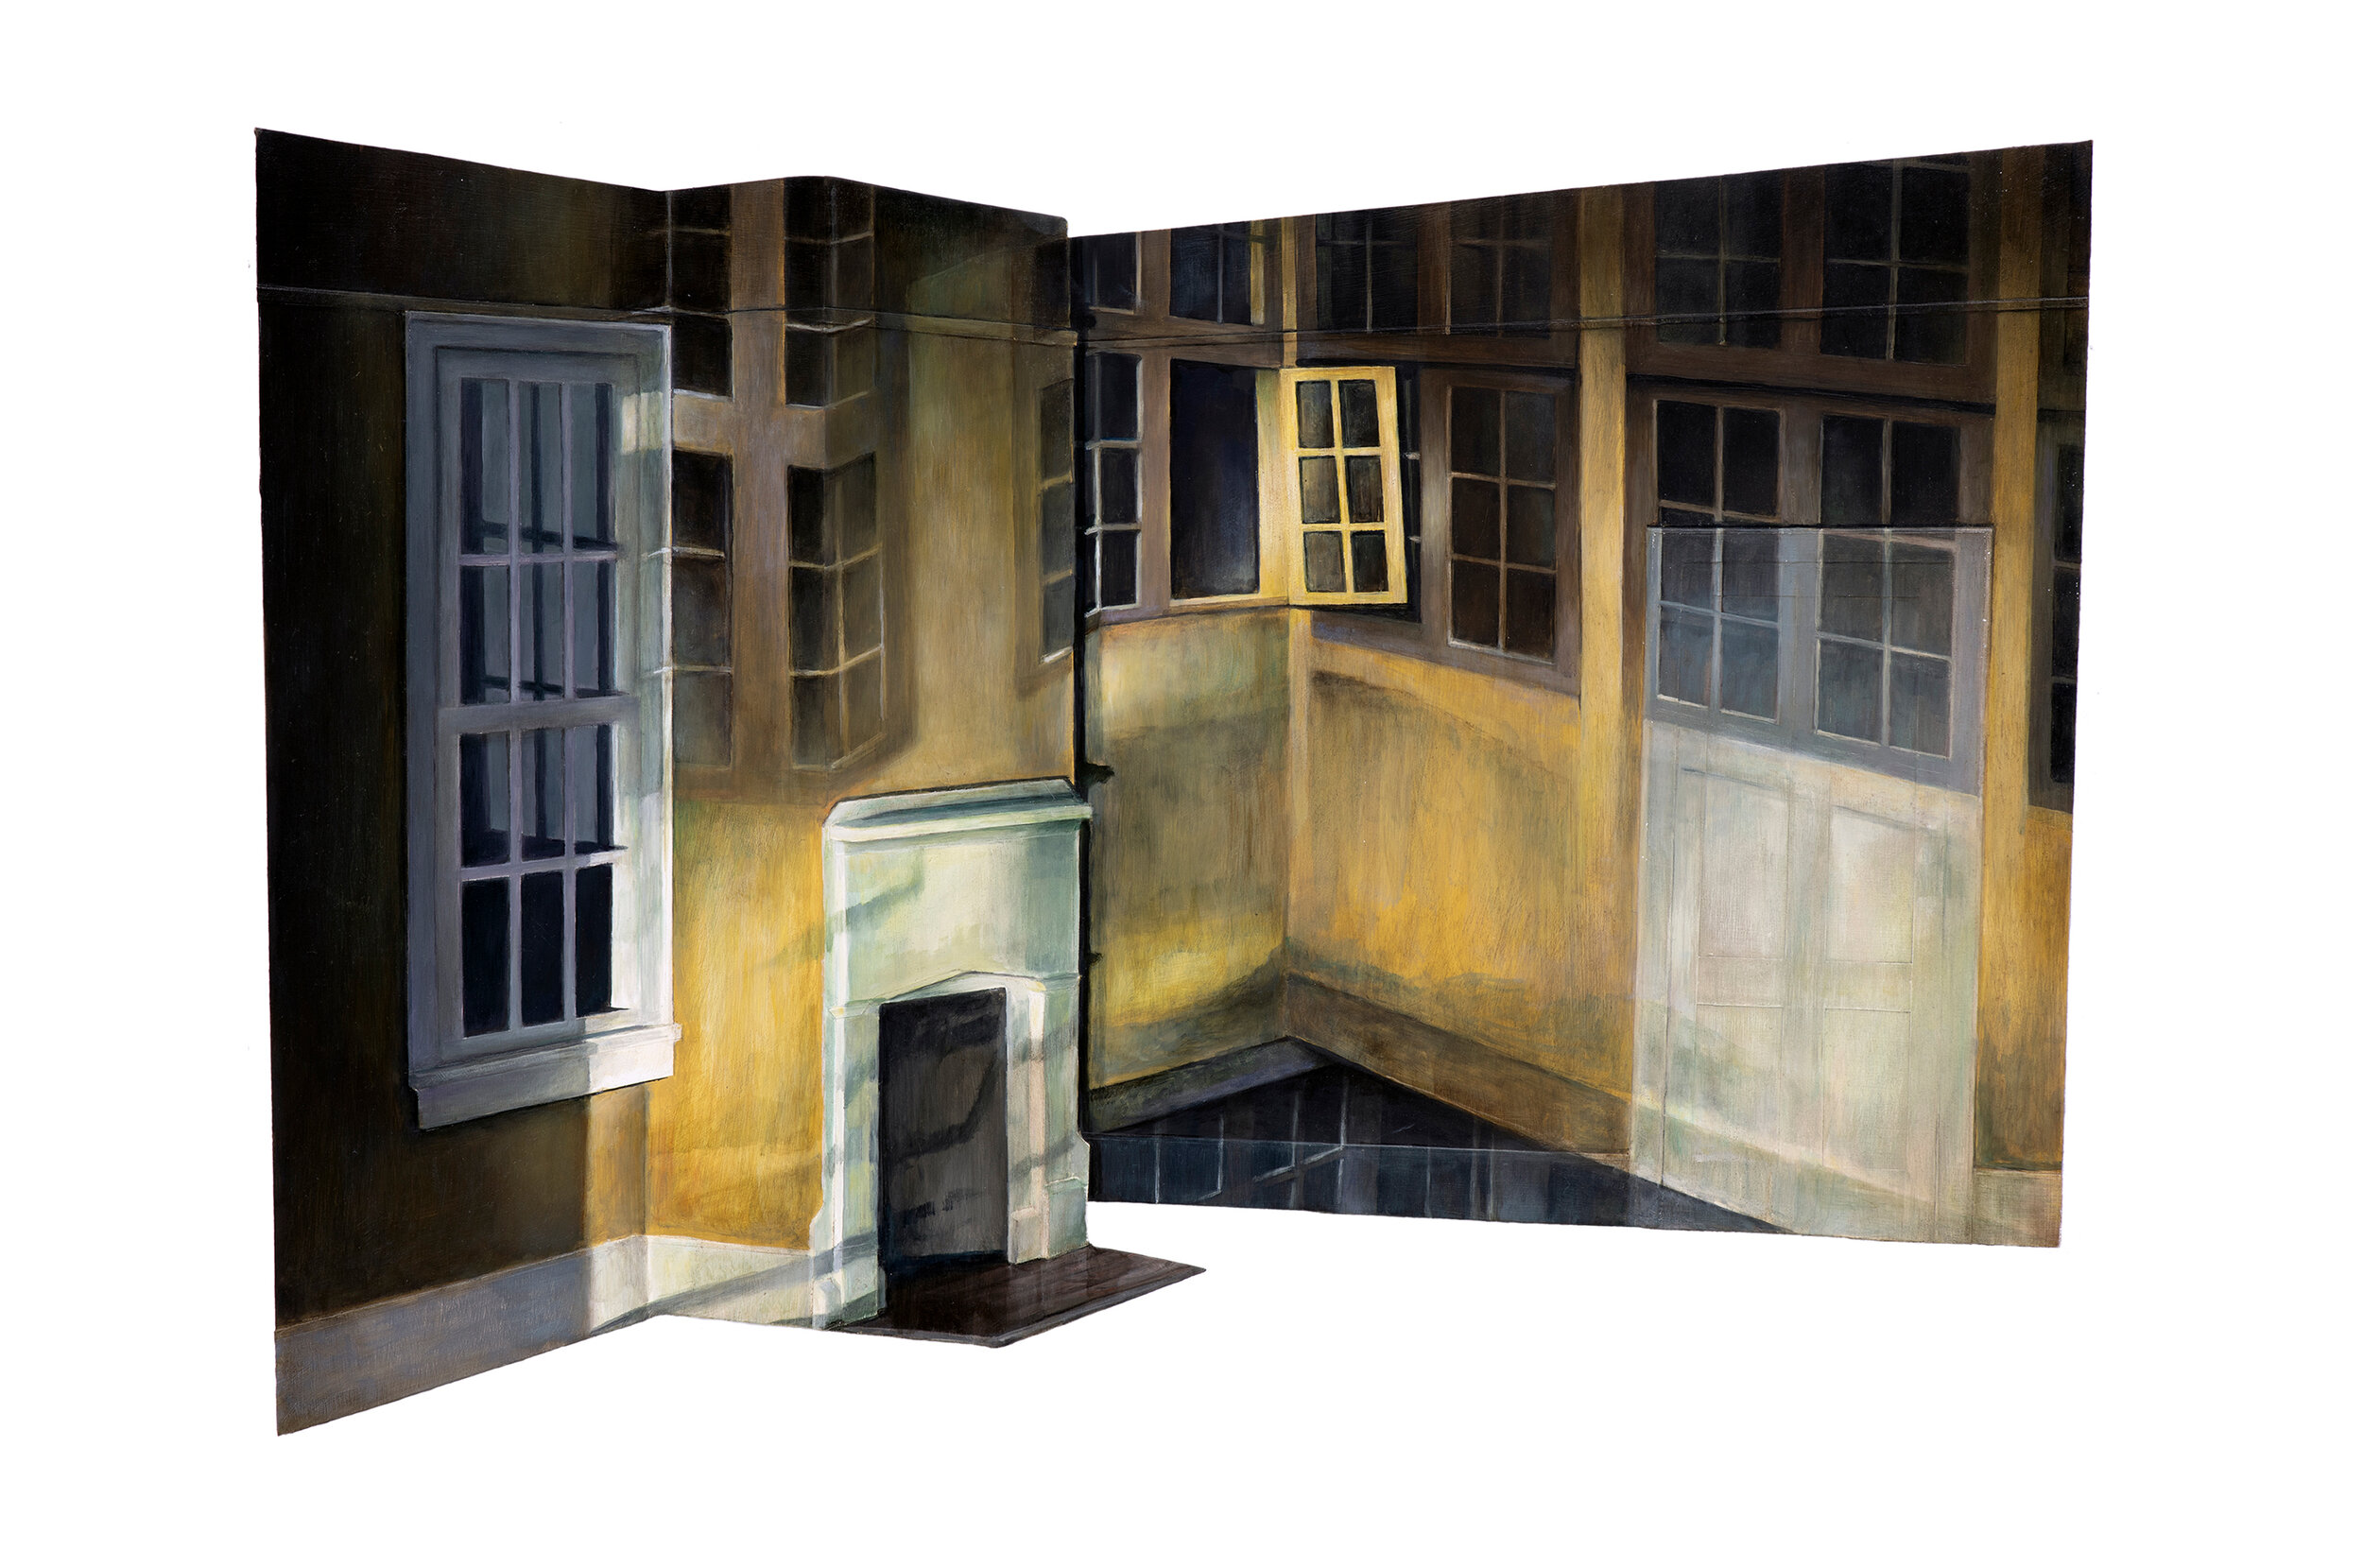   Vilhelm Hammershøi’s “Interior of Courtyard, Strandgade 30” Projected over Hopper Bedroom Model   2019  Oil on shaped and raised relief panel  17 x 23.5 inches 